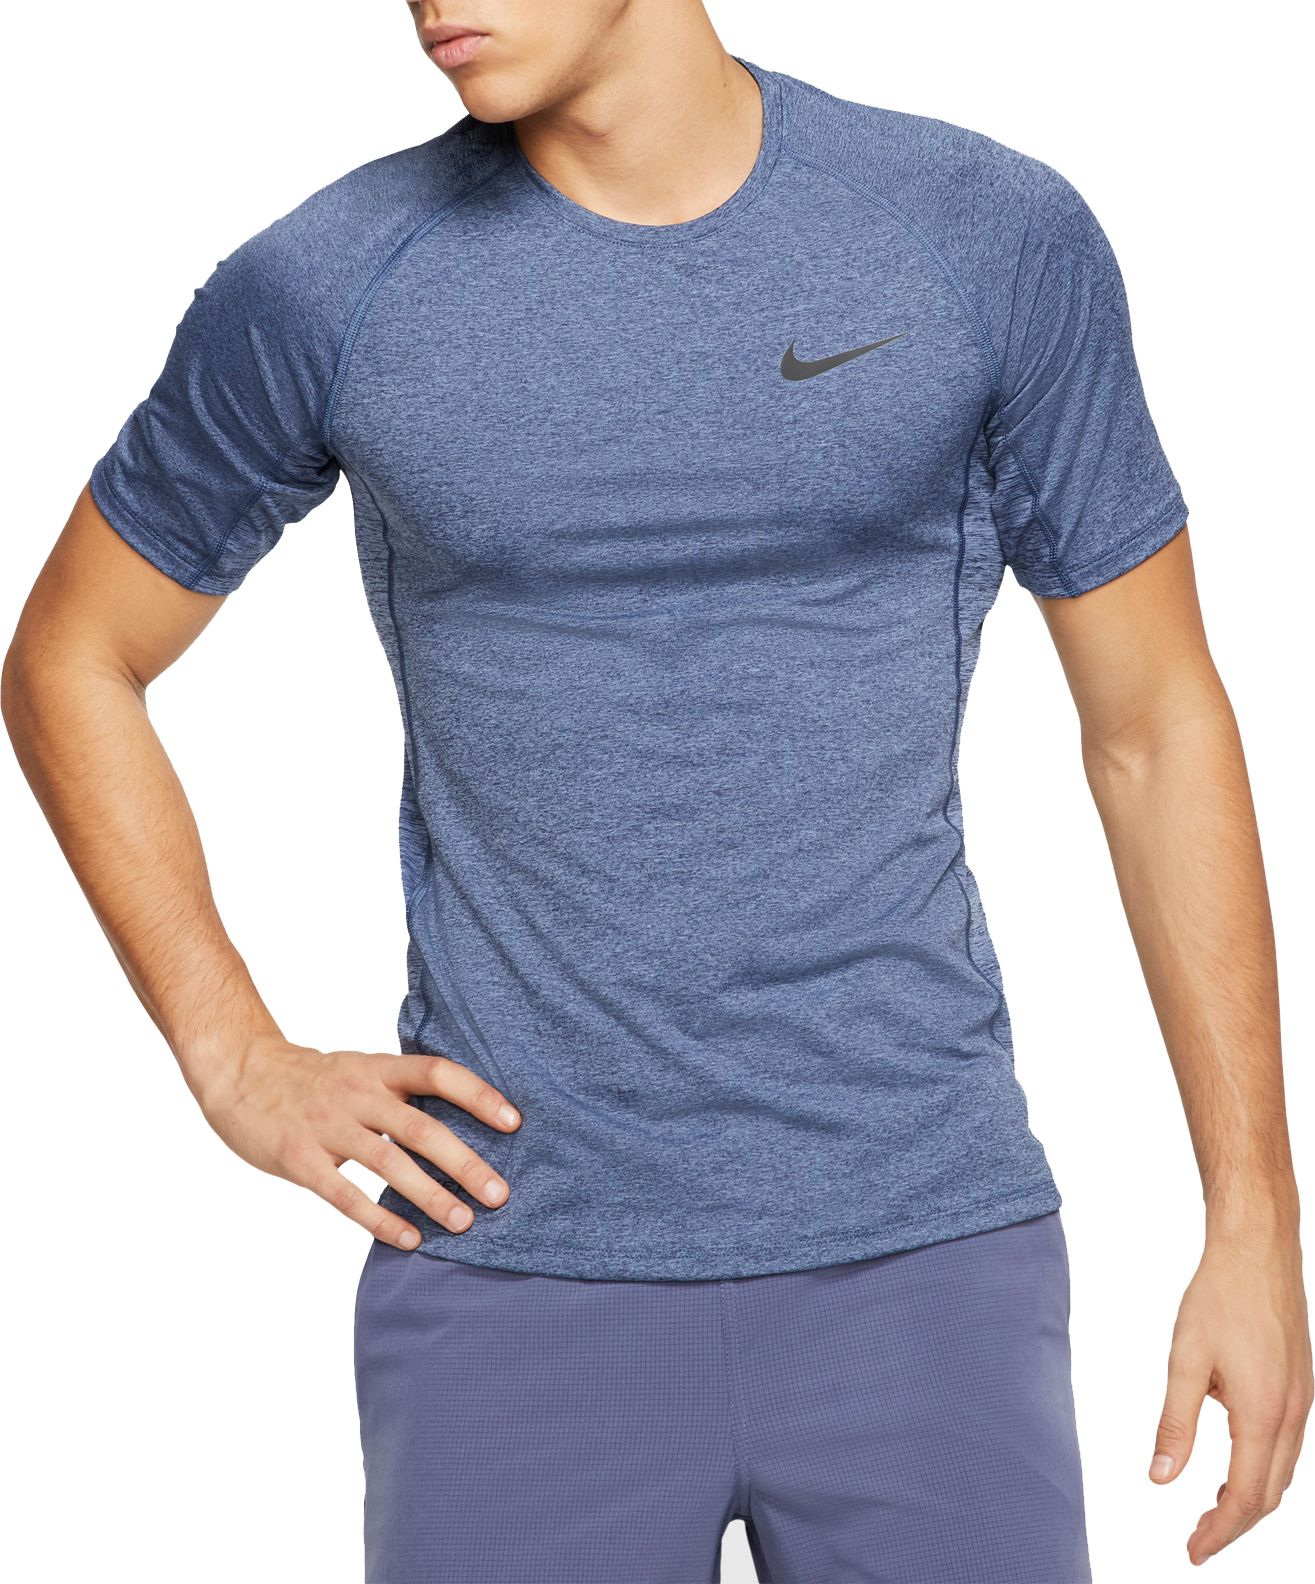 nike pro fitted top